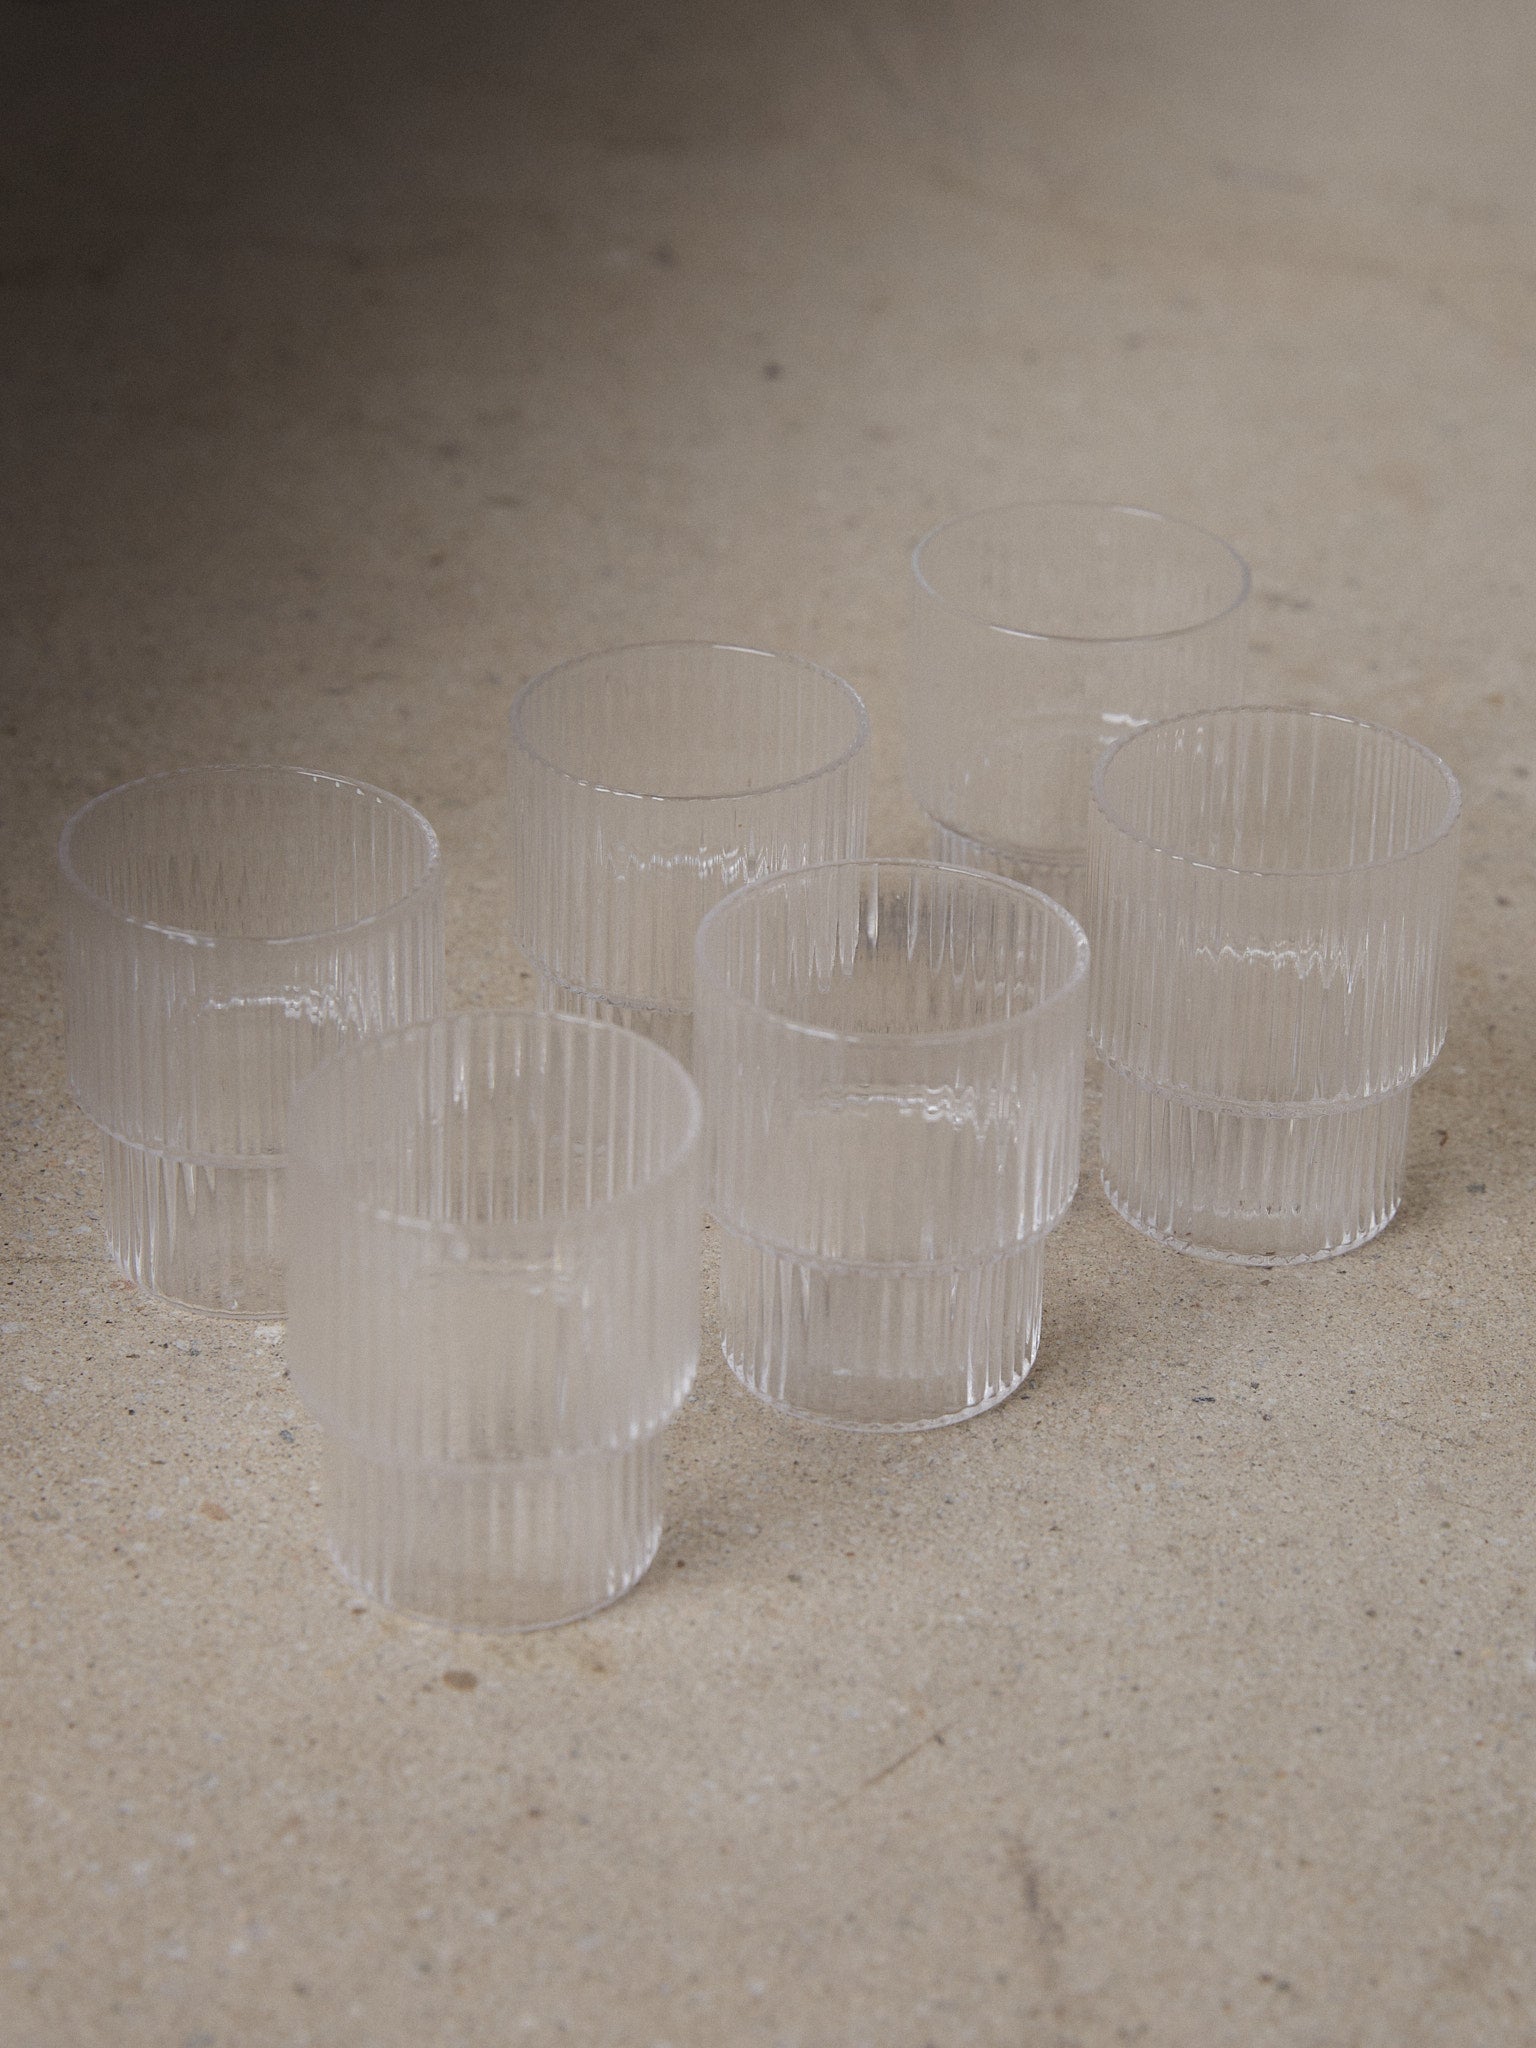 Ridge Shot Glass Set/6. A set of six unique shot glasses with geometric forms and a sophisticated vertical ridge surface in clear transparent glass